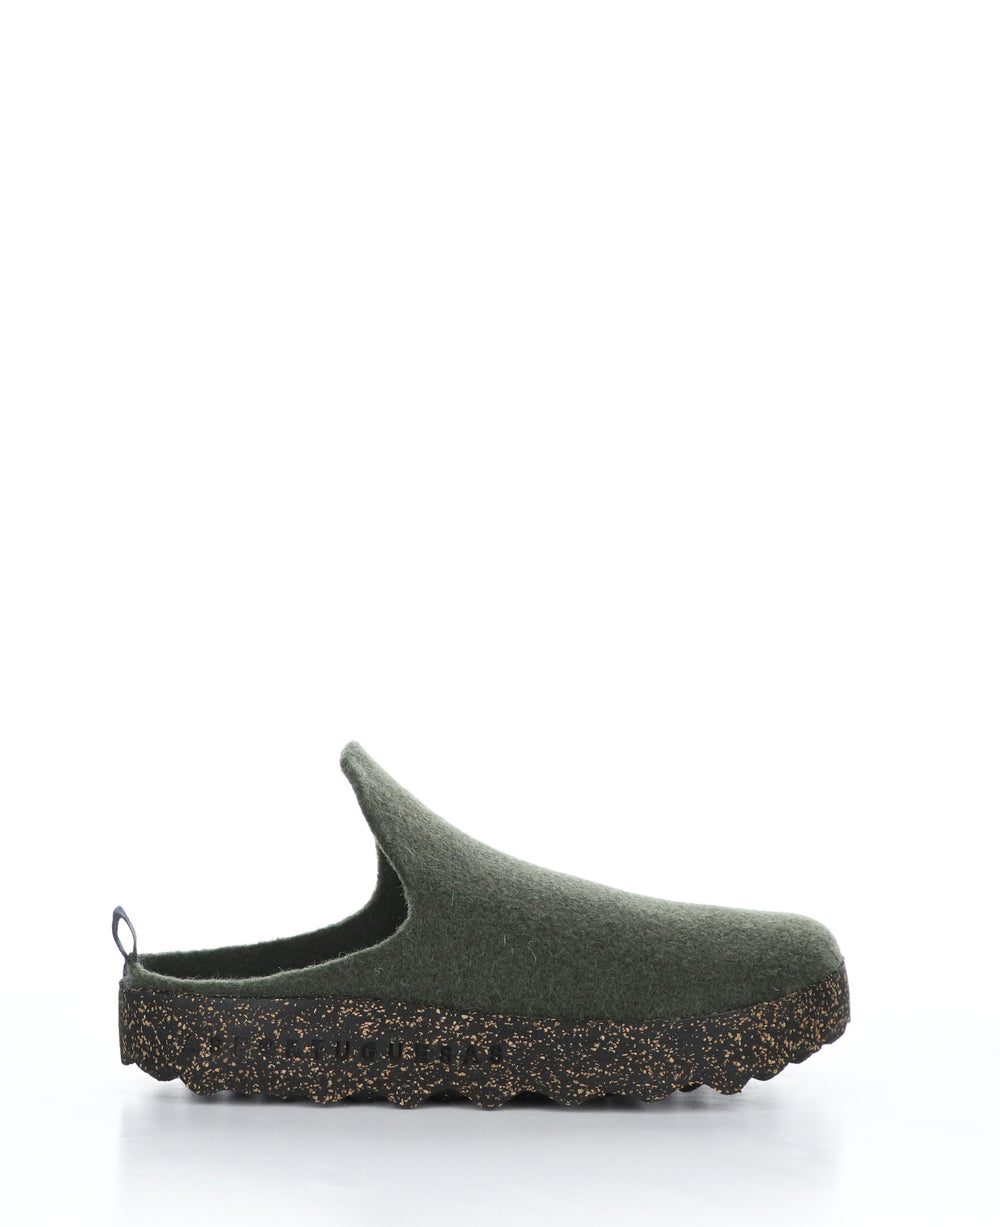 COME061ASPM Military Green Round Toe Shoes